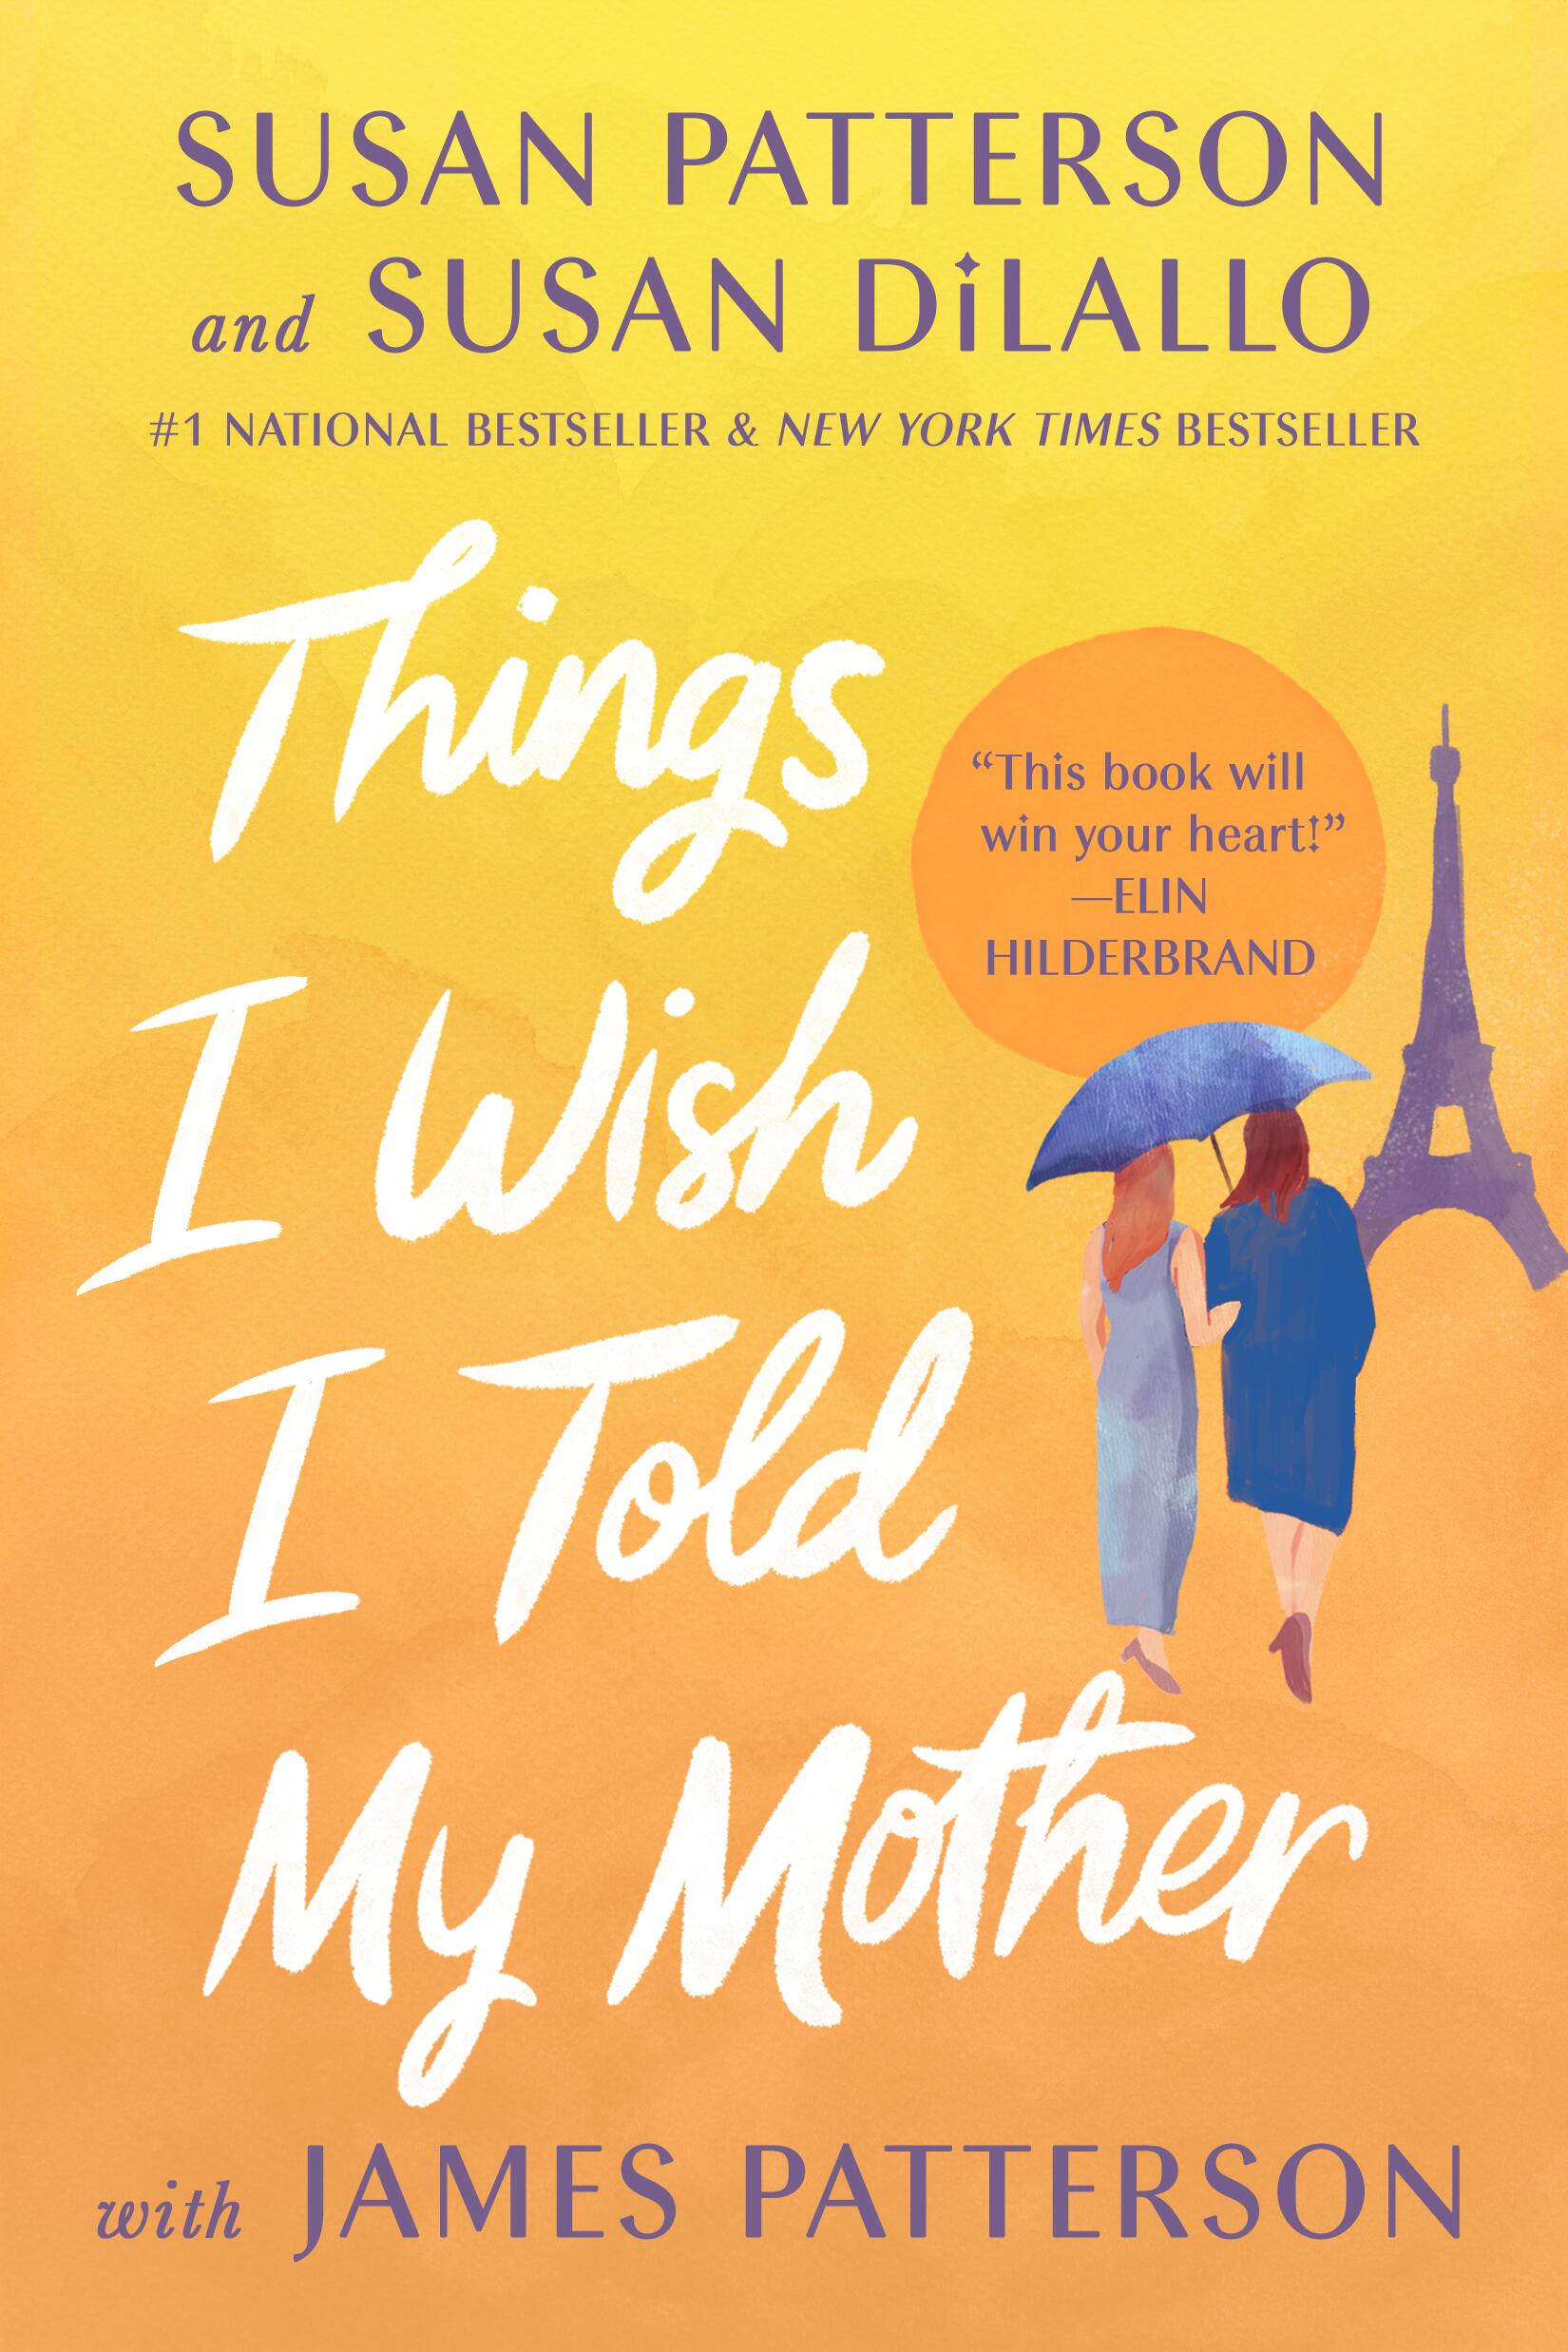 Things I Wish I Told My Mother by Susan Patterson